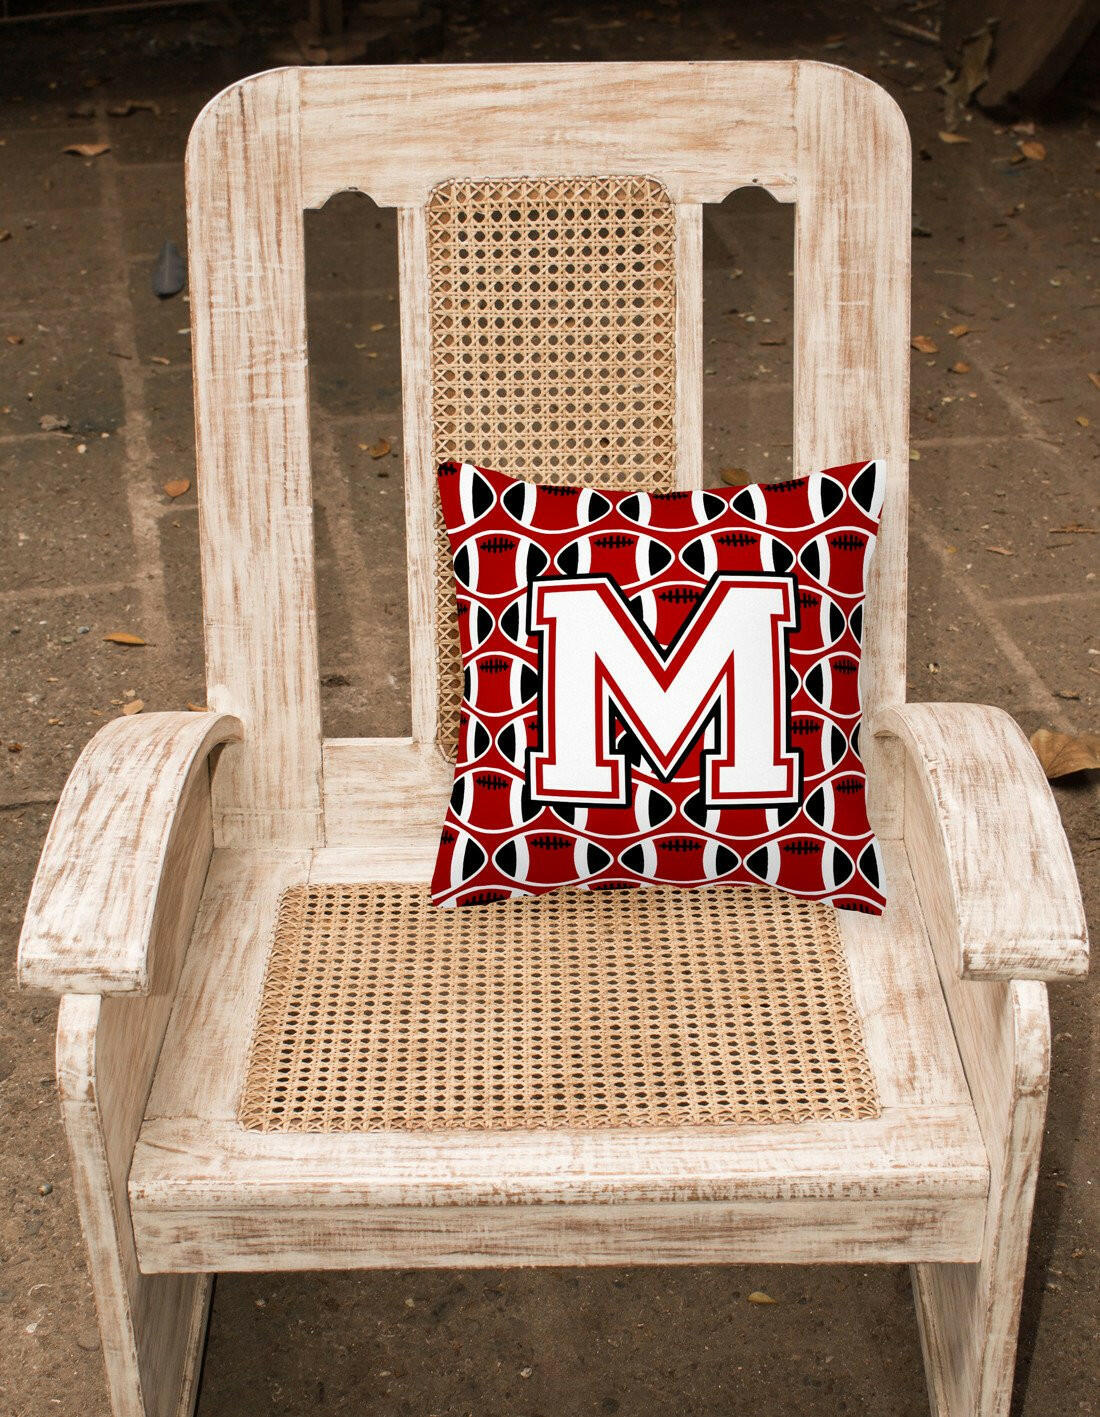 Letter M Football Cardinal and White Fabric Decorative Pillow CJ1082-MPW1414 by Caroline's Treasures